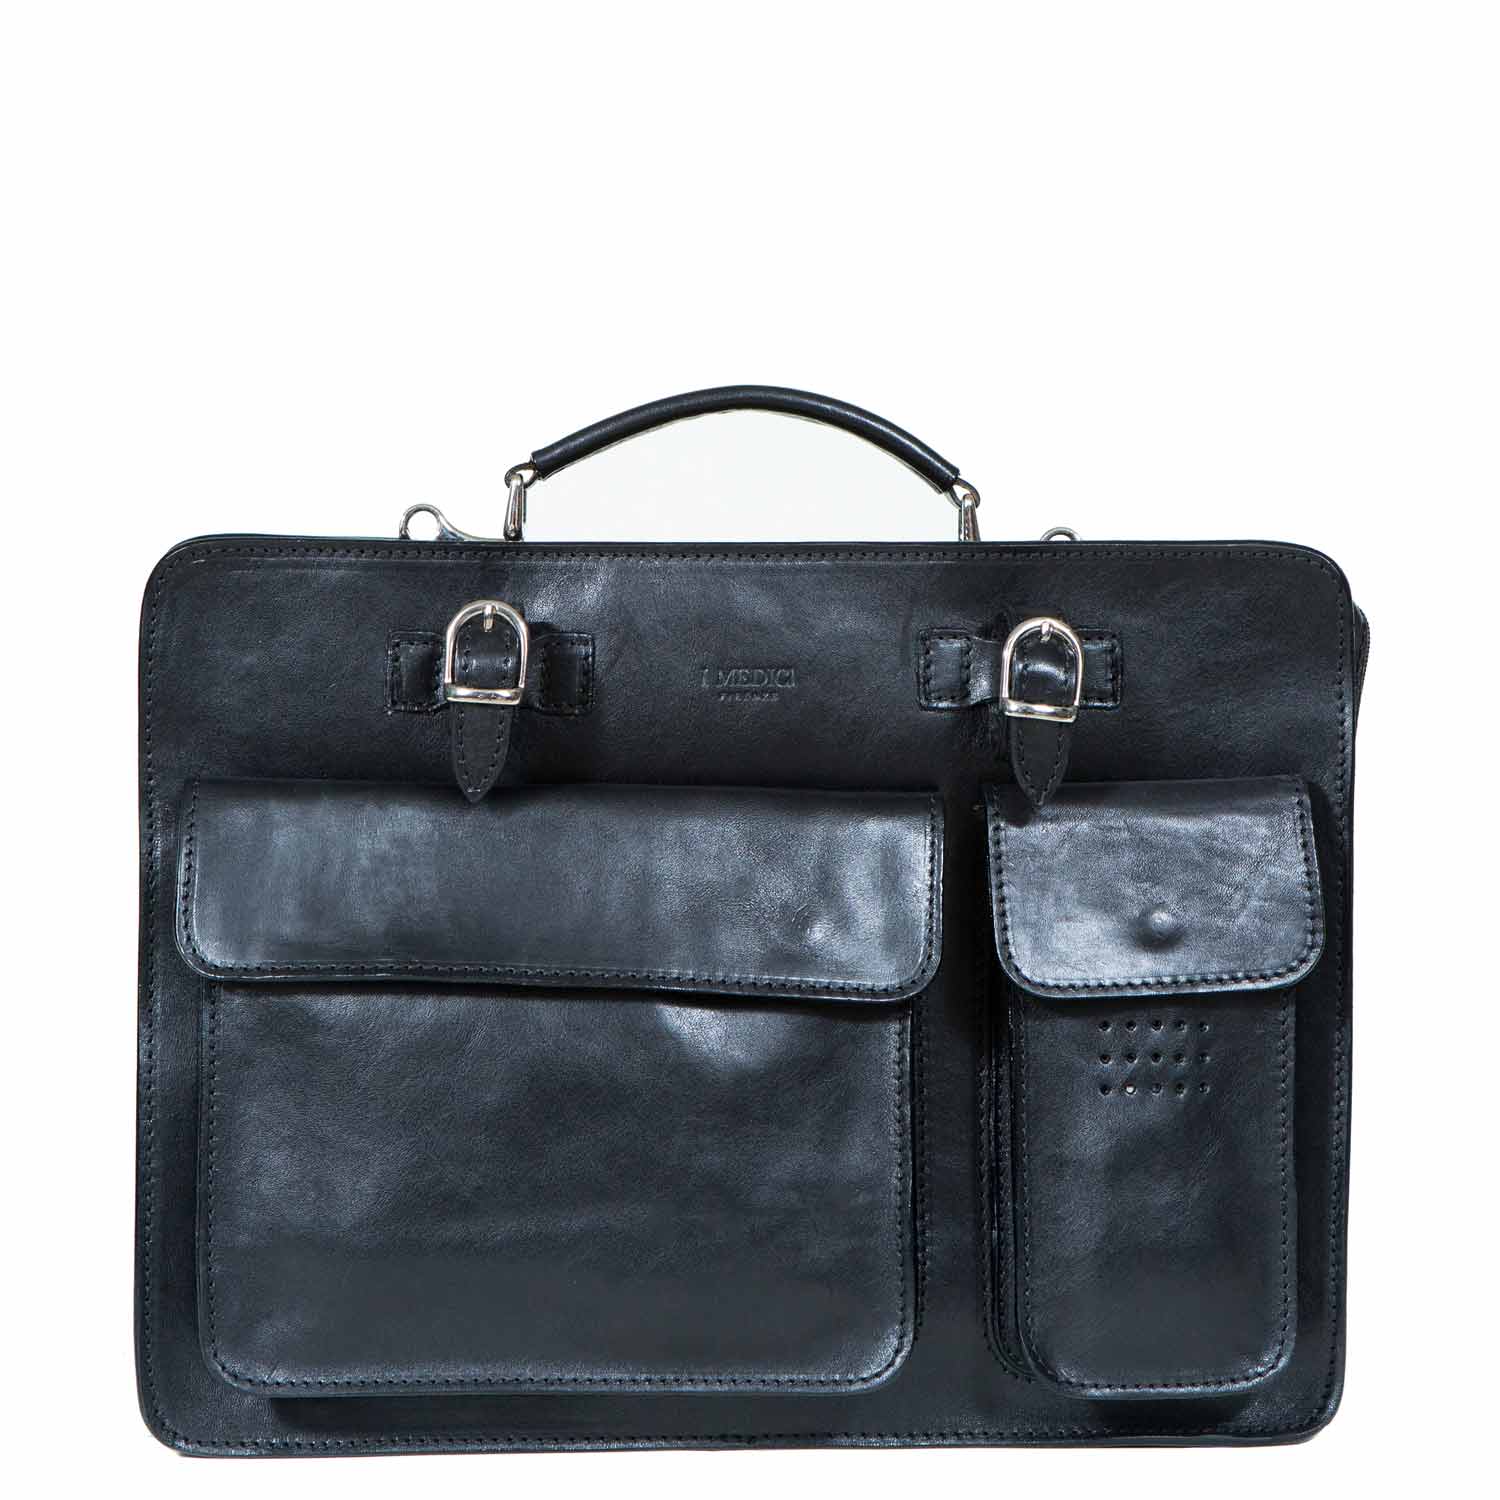 Full grain LEATHER doctor's bag with metal zip and front pocket